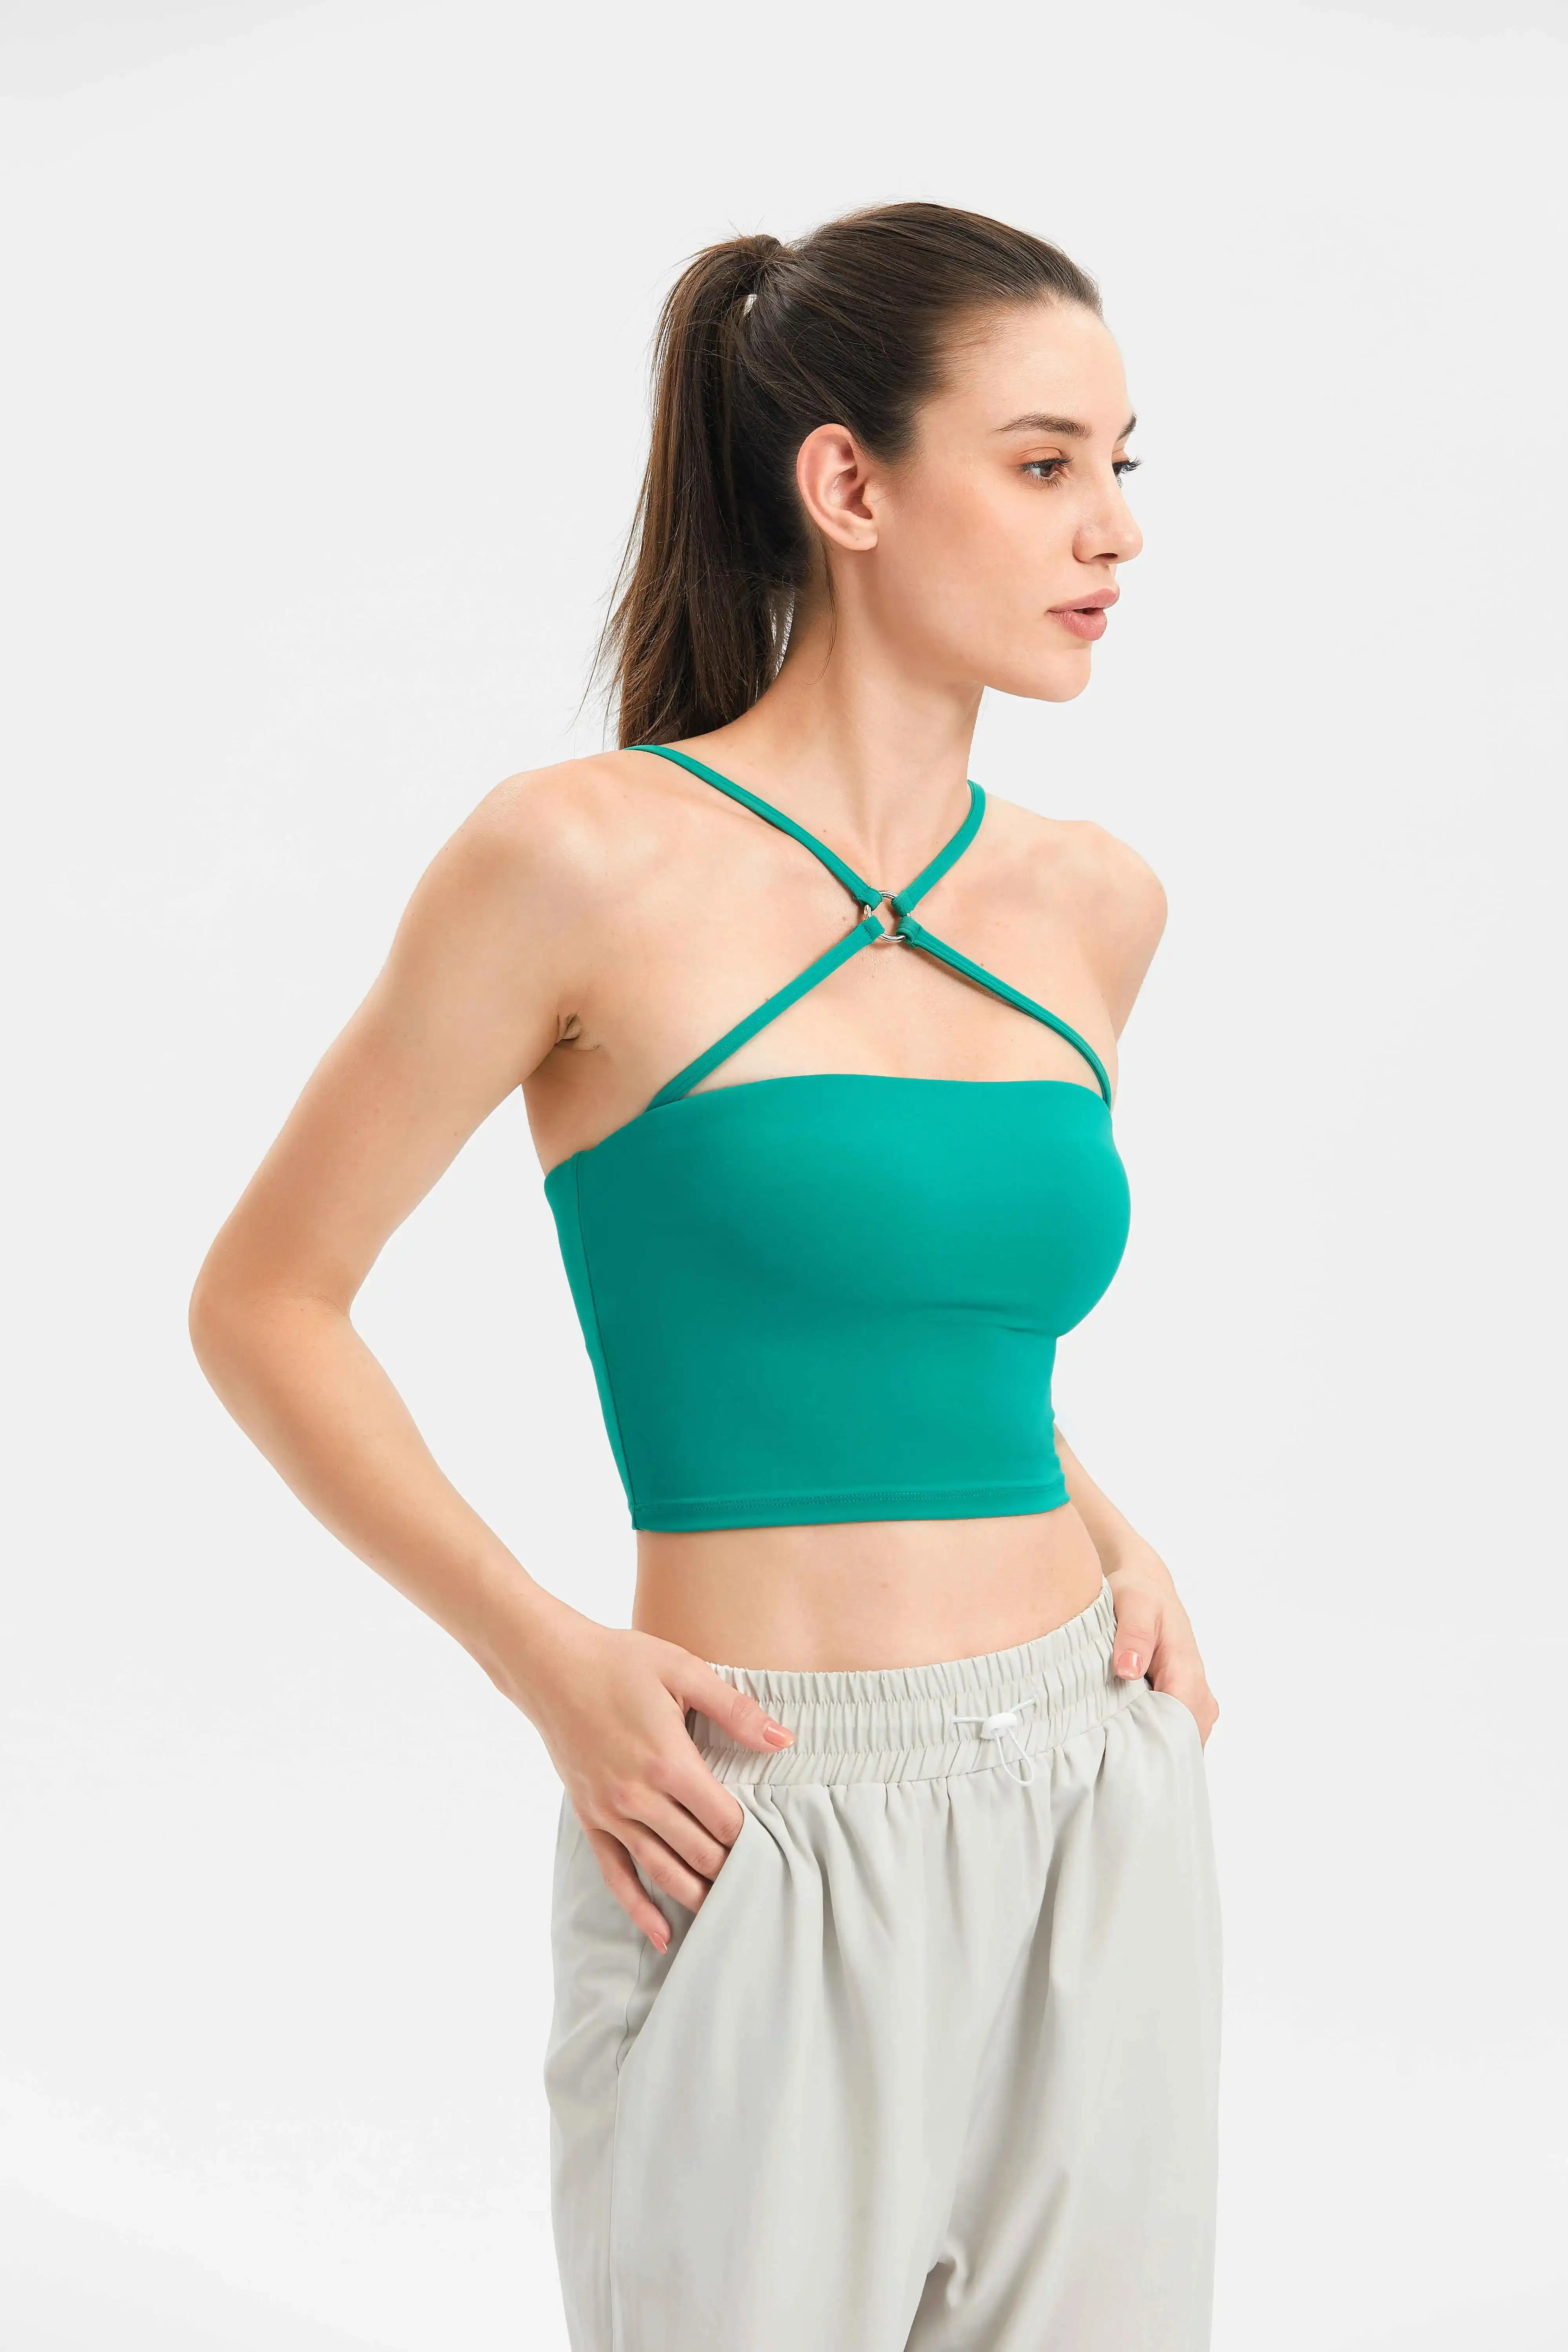 Set Breathable Sports Bra Antisweat Fitness Top Seamless Yoga Bra  Shockproof Crop Top Women Push Up Sport Bra Gym Workout Top From Zcdsk,  $15.09